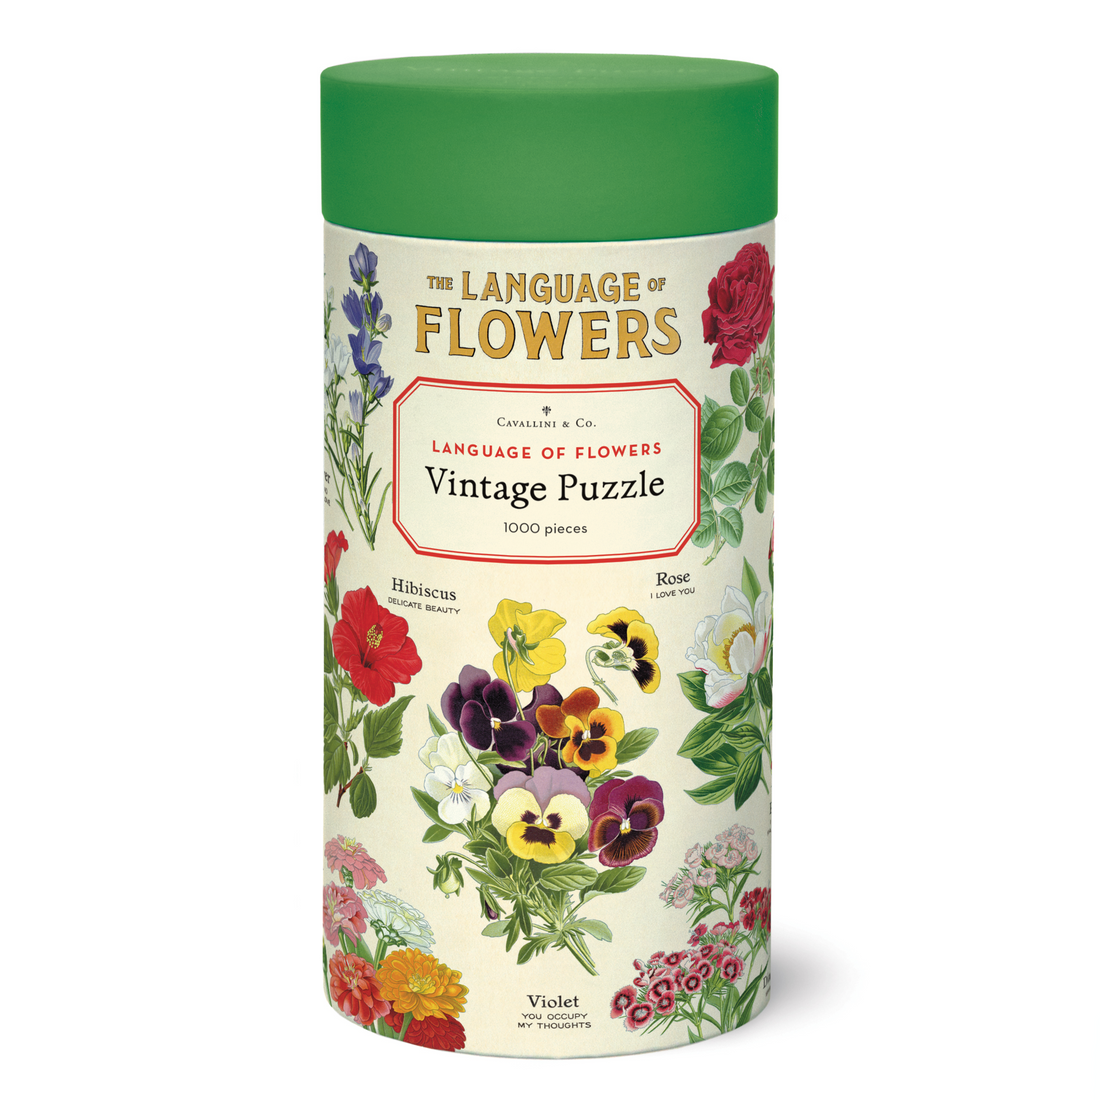 Vintage floral puzzle titled &quot;Language of Flowers Puzzle&quot; with 1000 pieces, featuring imagery from the Cavallini archives.